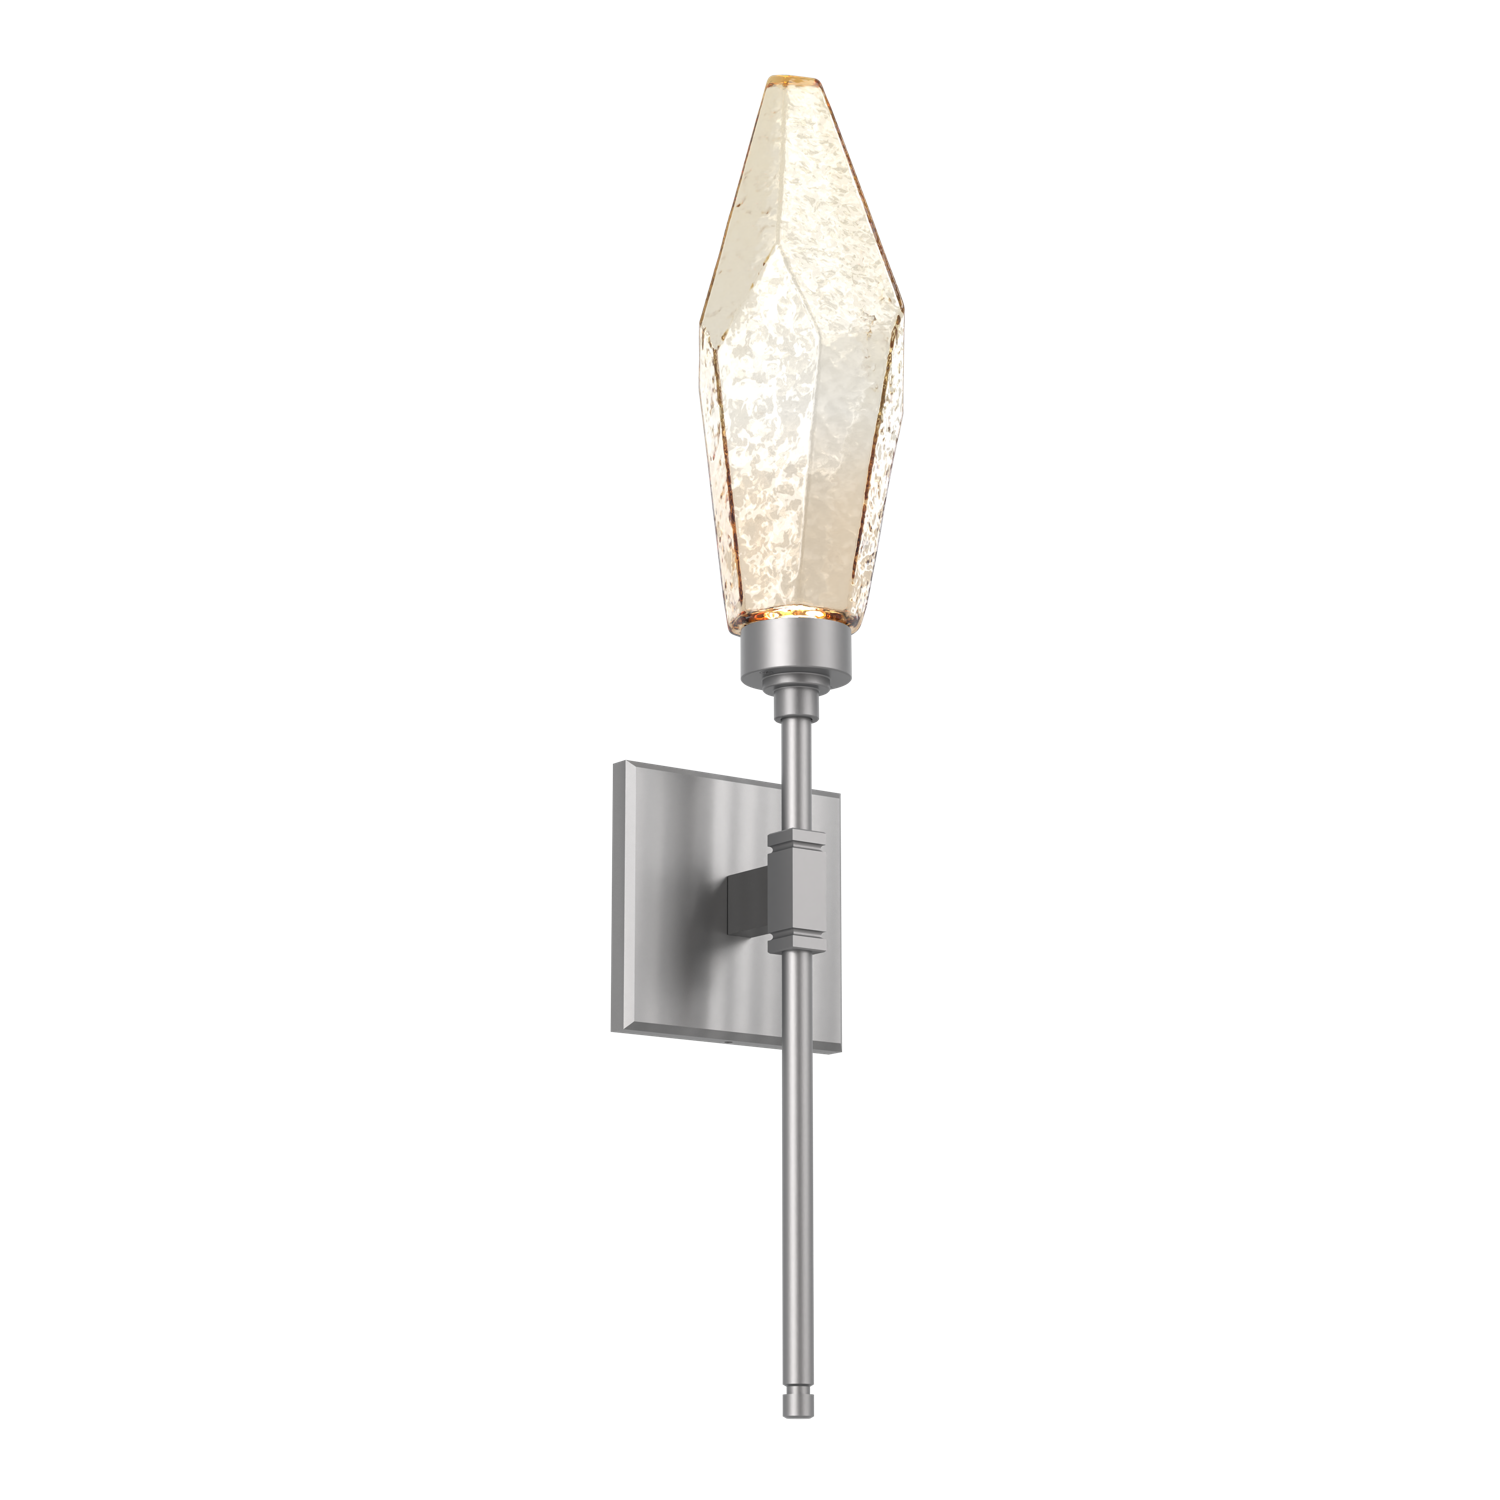 IDB0050-04-SN-CA-Hammerton-Studio-Rock-Crystal-ada-certified-belvedere-wall-sconce-with-satin-nickel-finish-and-chilled-amber-blown-glass-shades-and-LED-lamping